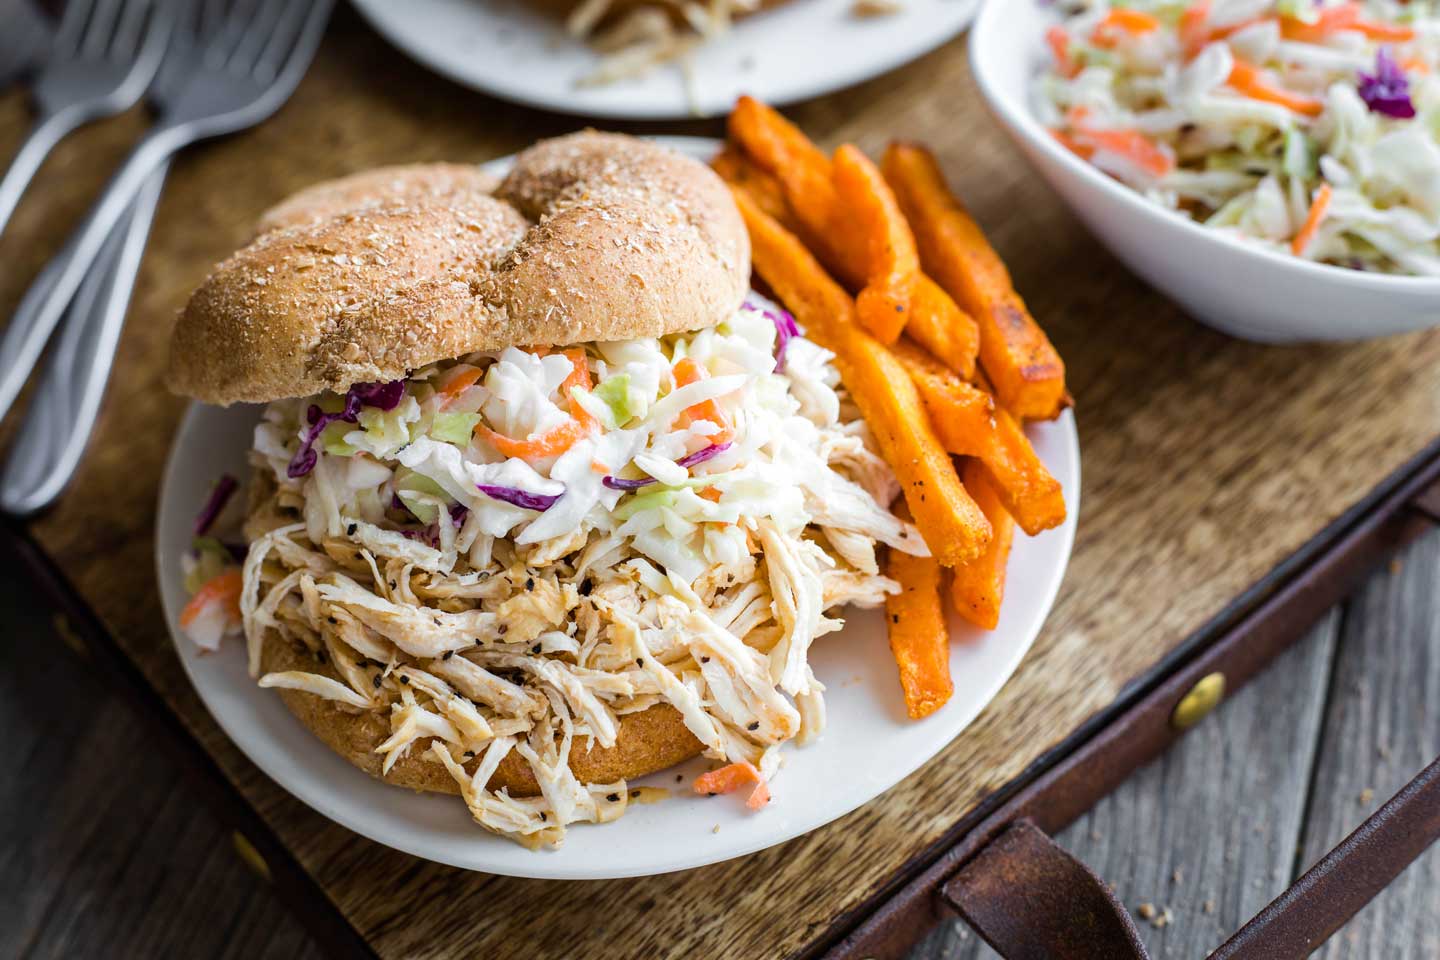 serving tray with extra forks and coleslaw, with a pulled chicken sandwich and sweet potato fries on a central plate